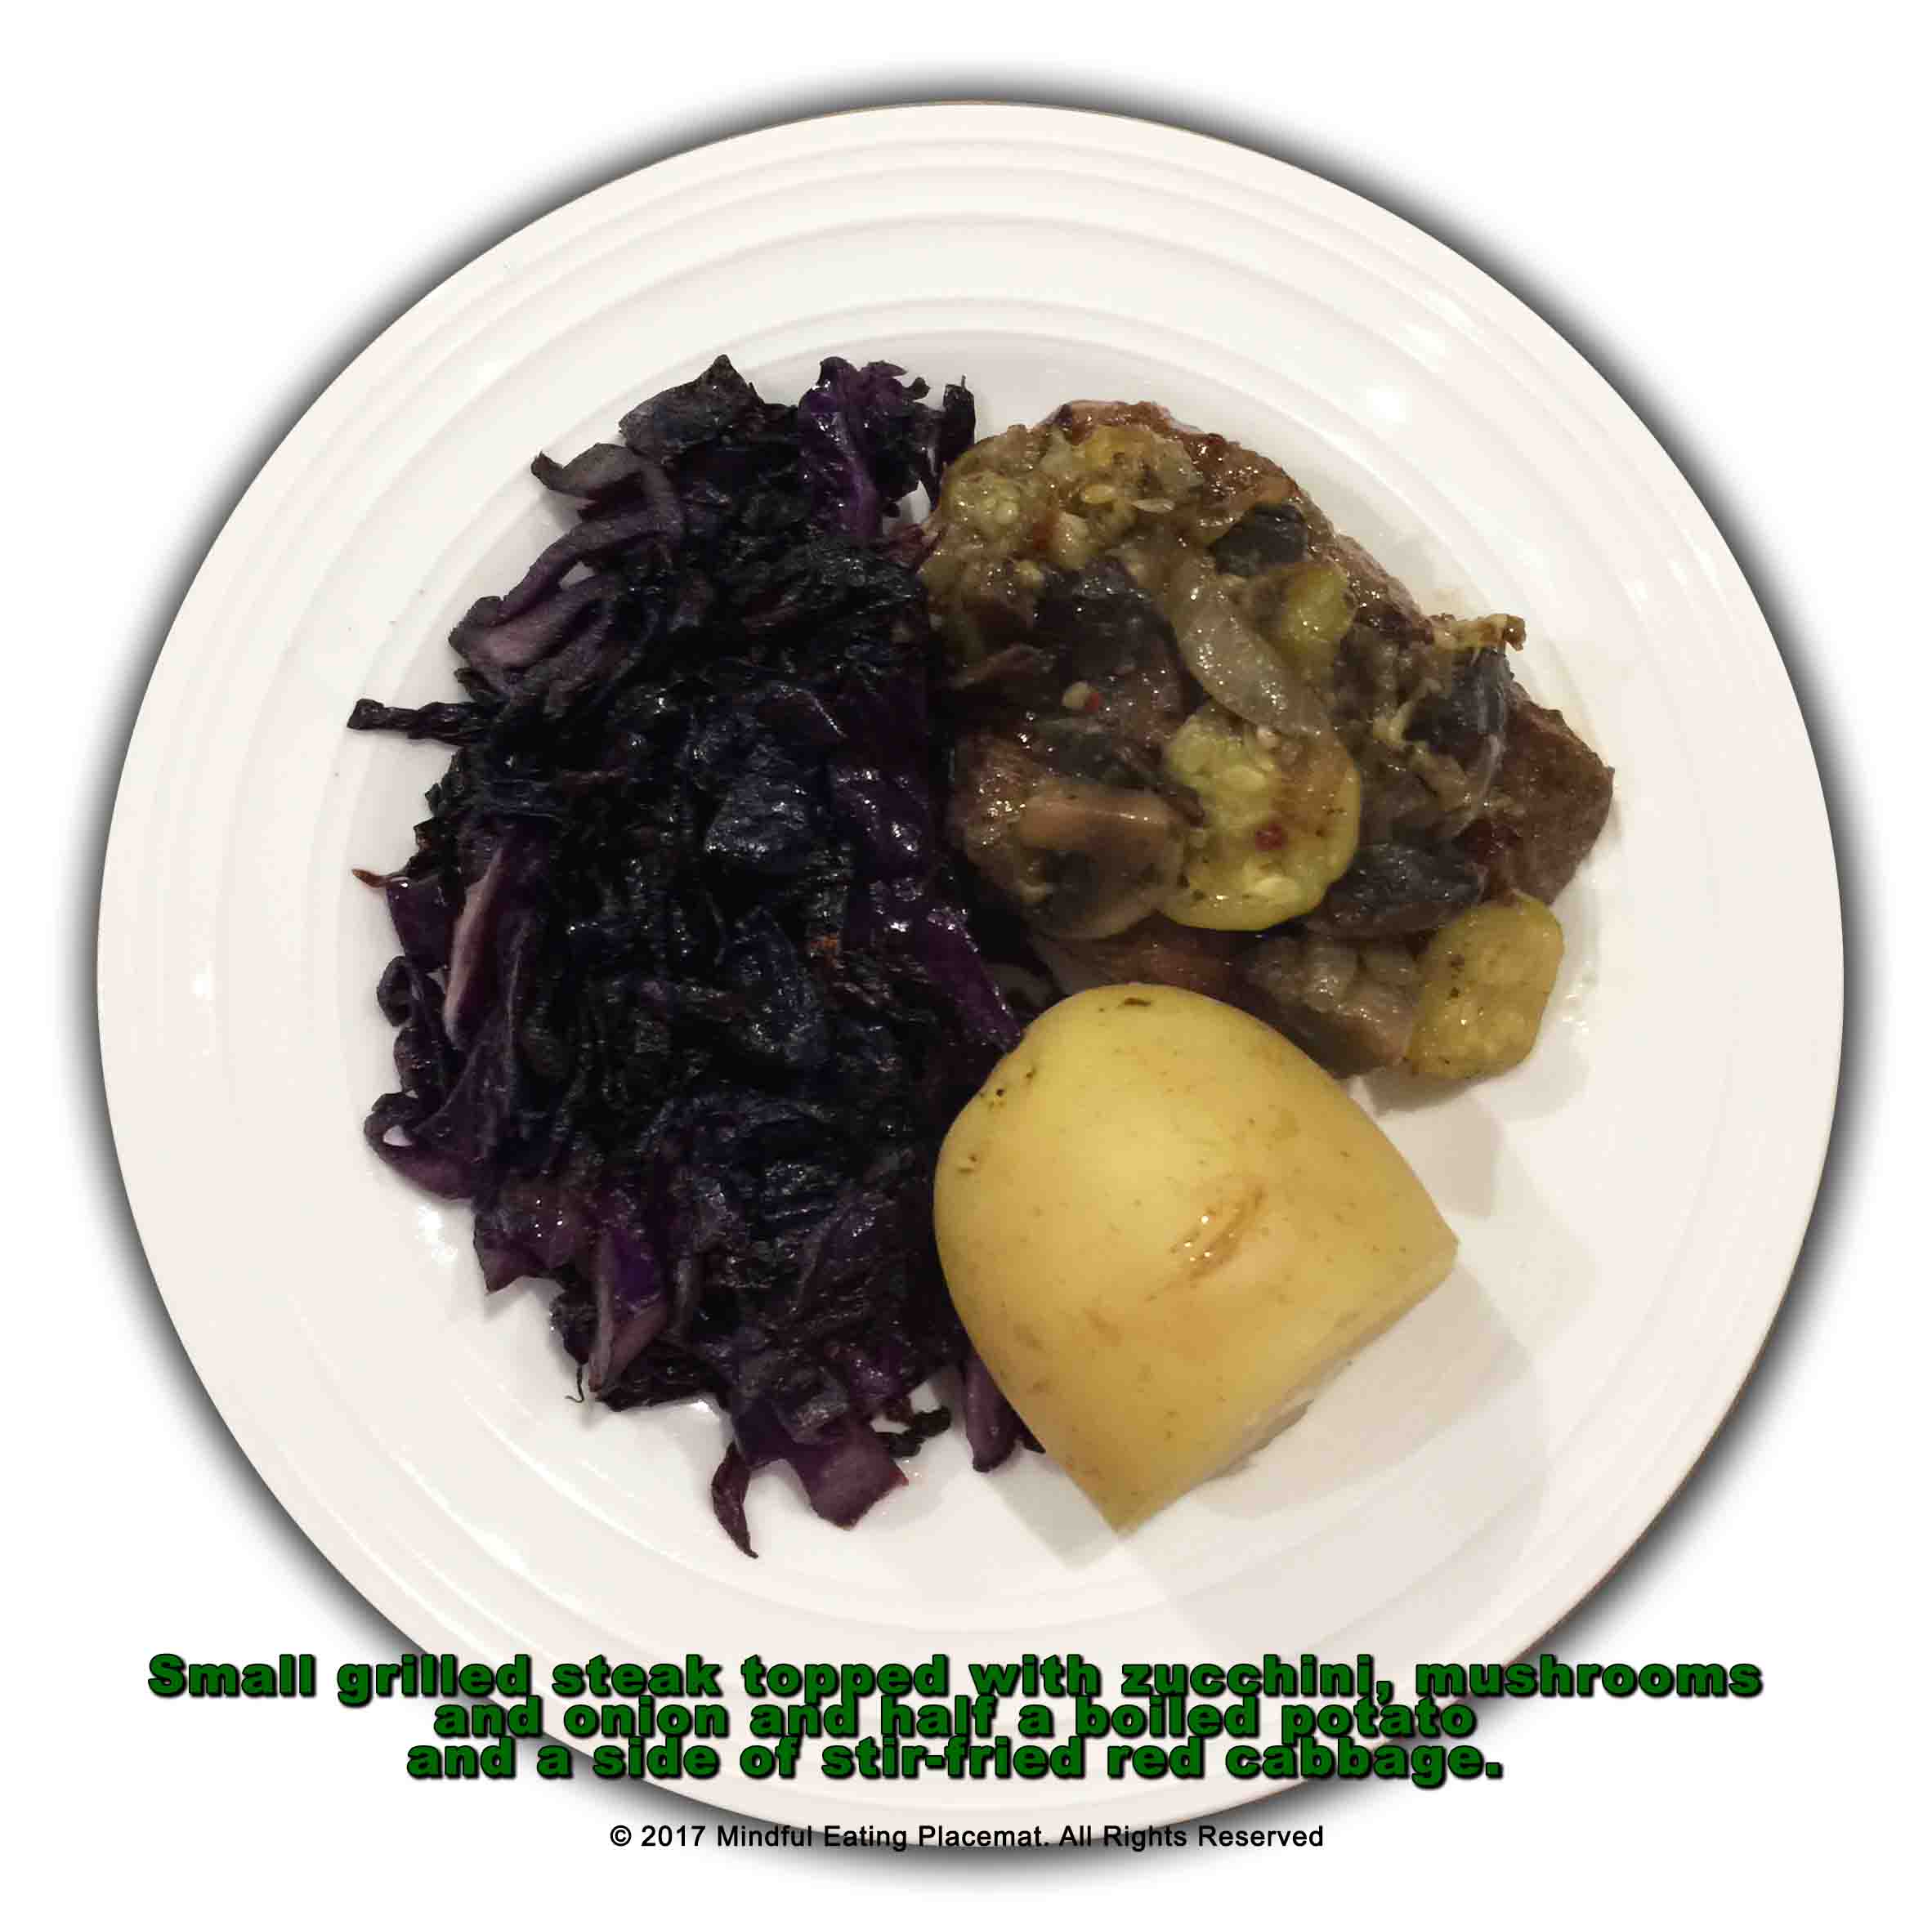 Steak topped with zucchini and mushrooms with a boiled potato and stir-fried cabbage 